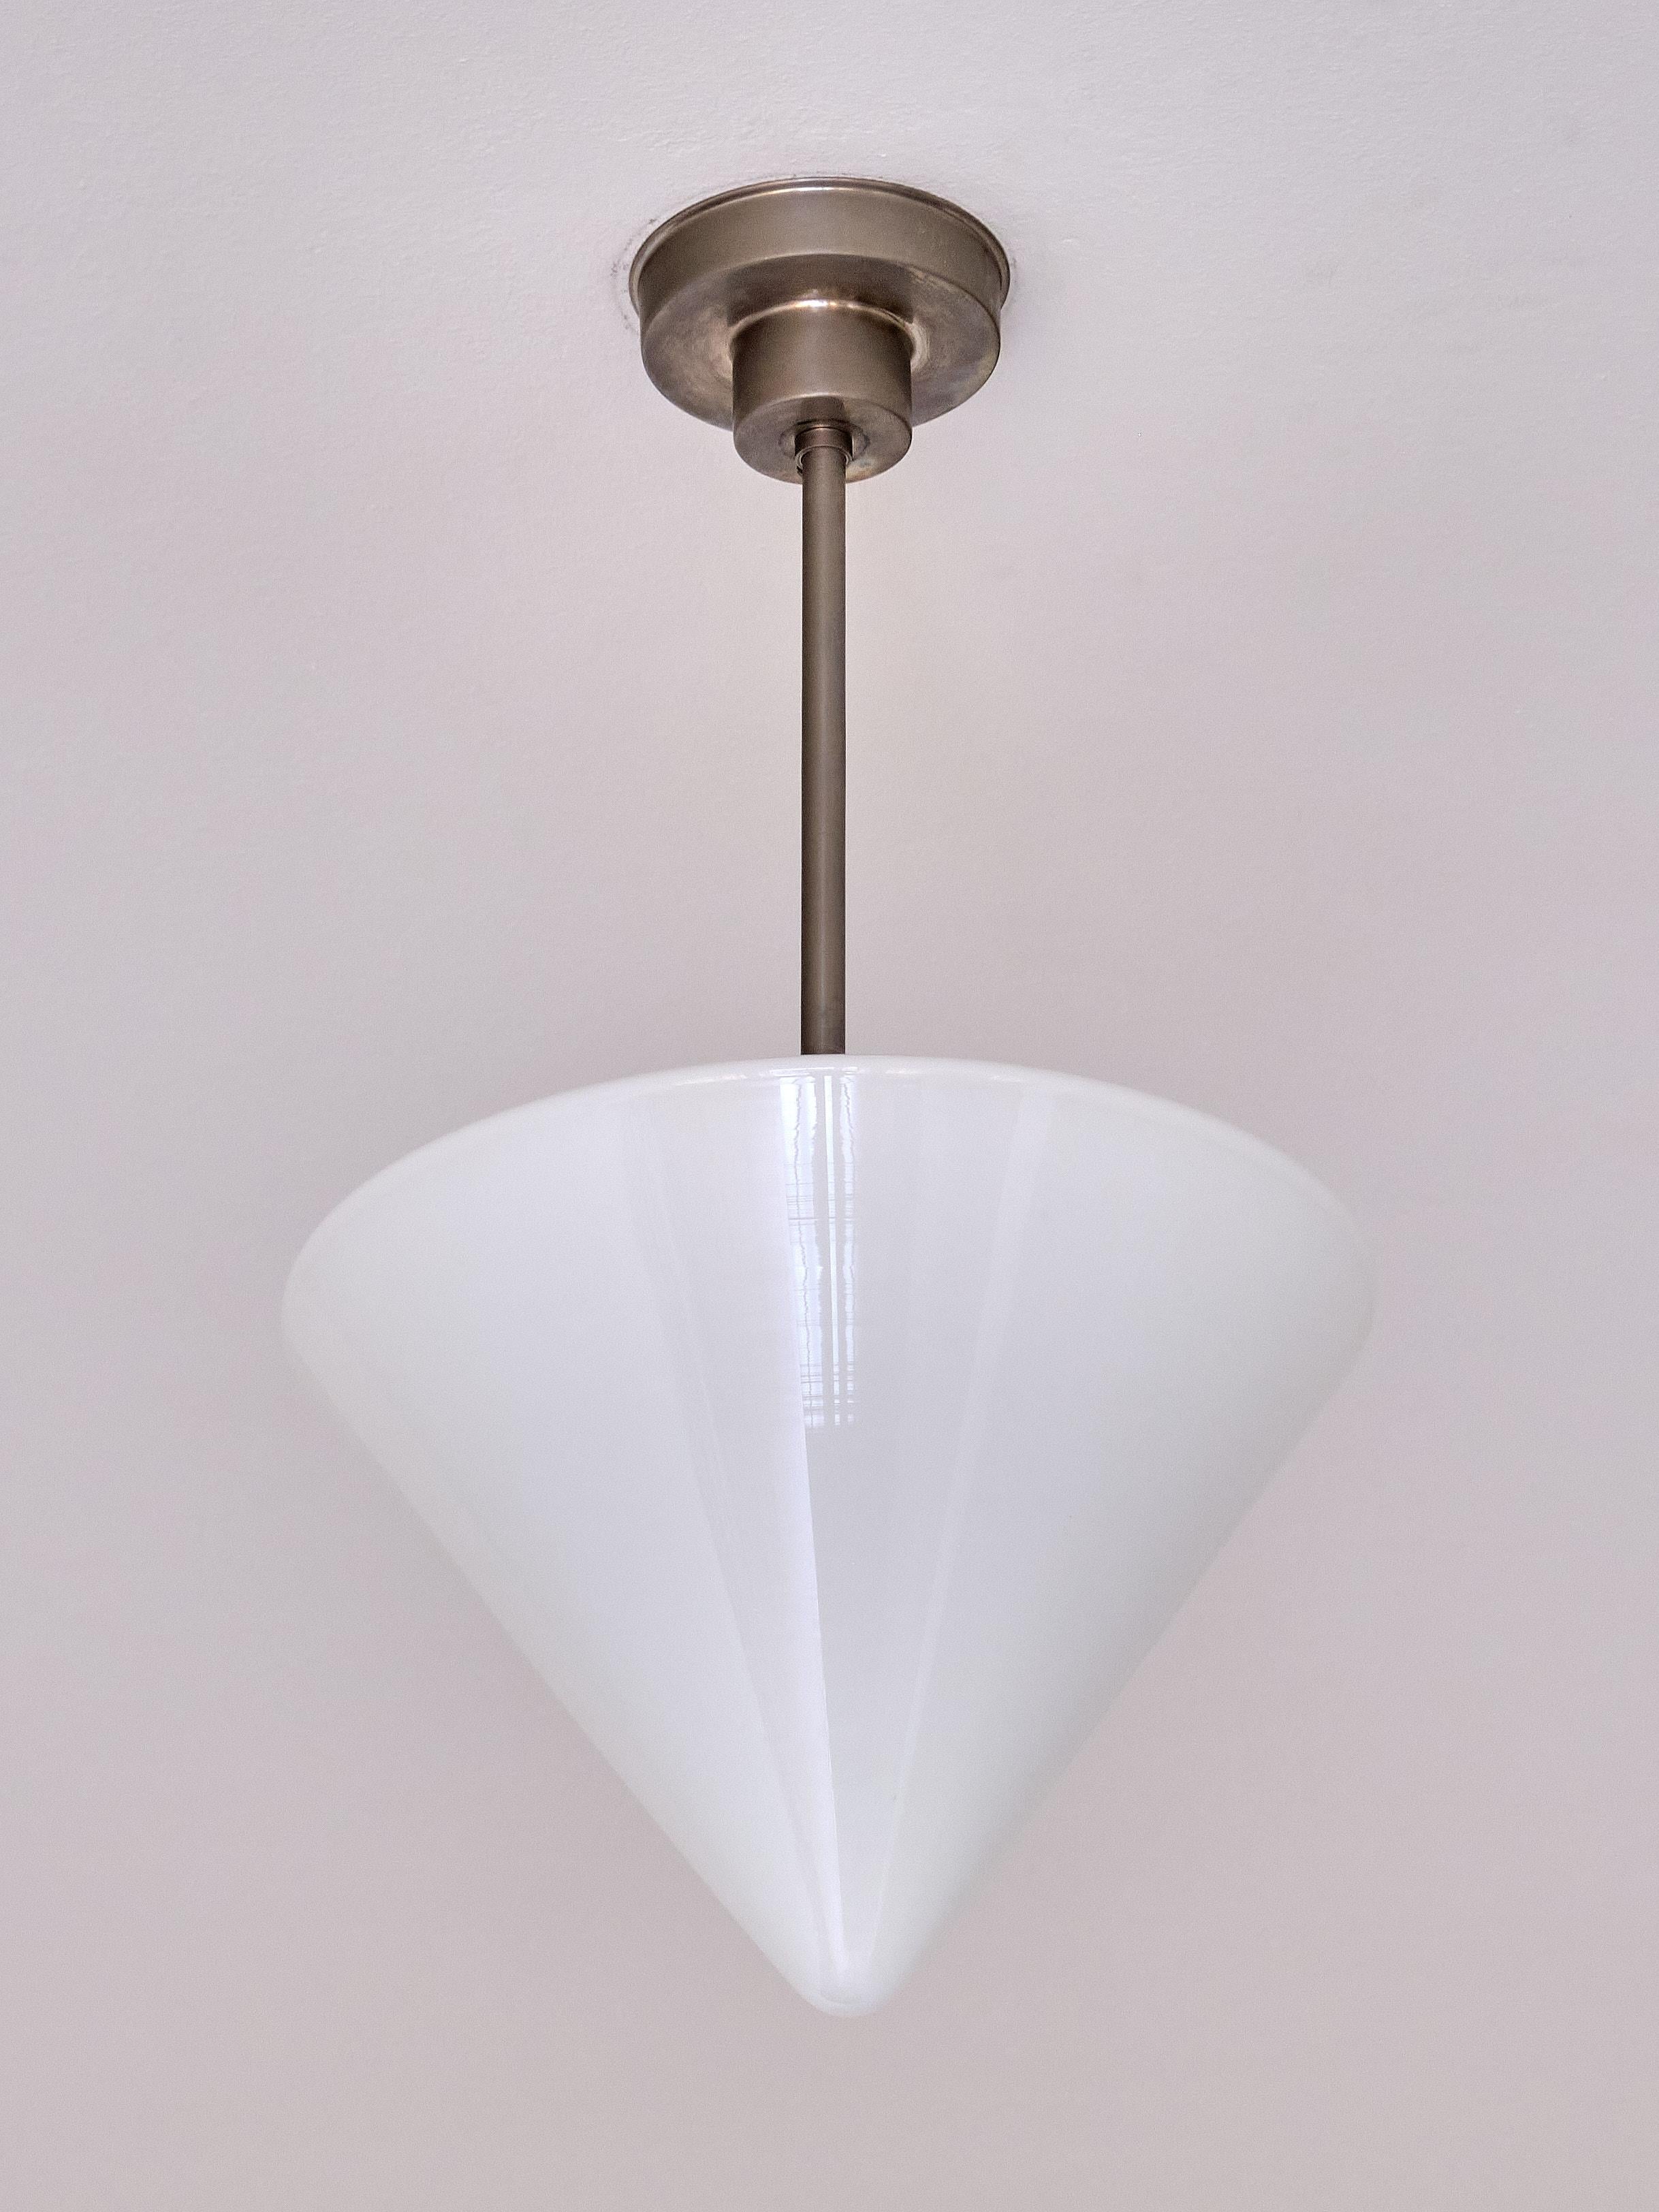 Art Deco Gispen Cone Shaped Pendant Light in Opal Glass and Nickel, Netherlands, 1930s For Sale